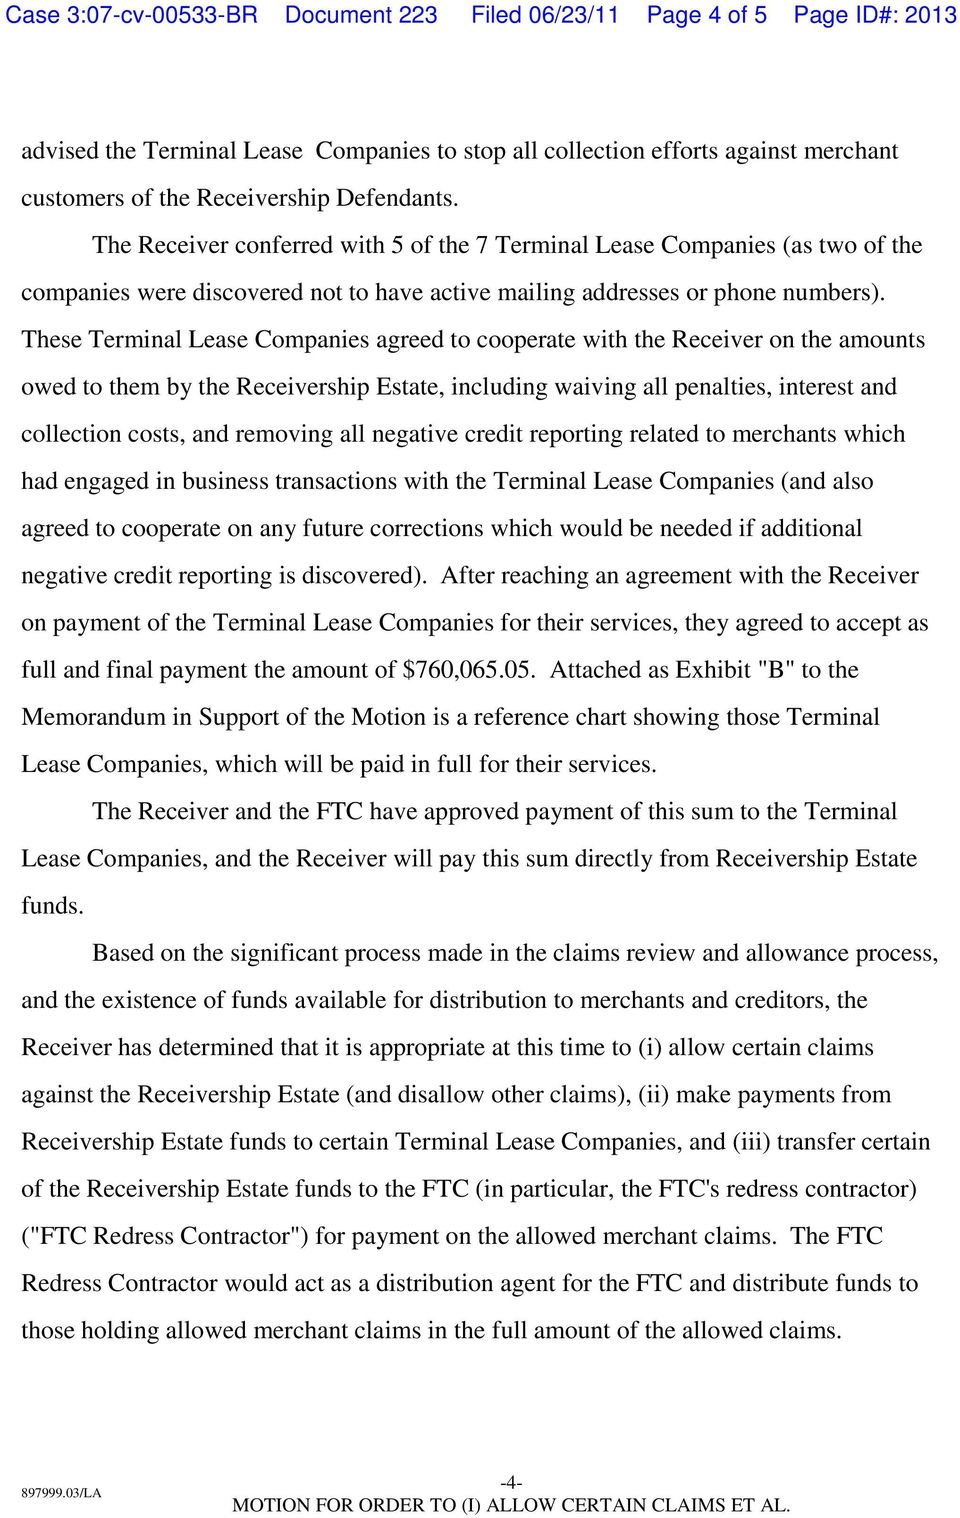 These Terminal Lease Companies agreed to cooperate with the Receiver on the amounts owed to them by the Receivership Estate, including waiving all penalties, interest and collection costs, and